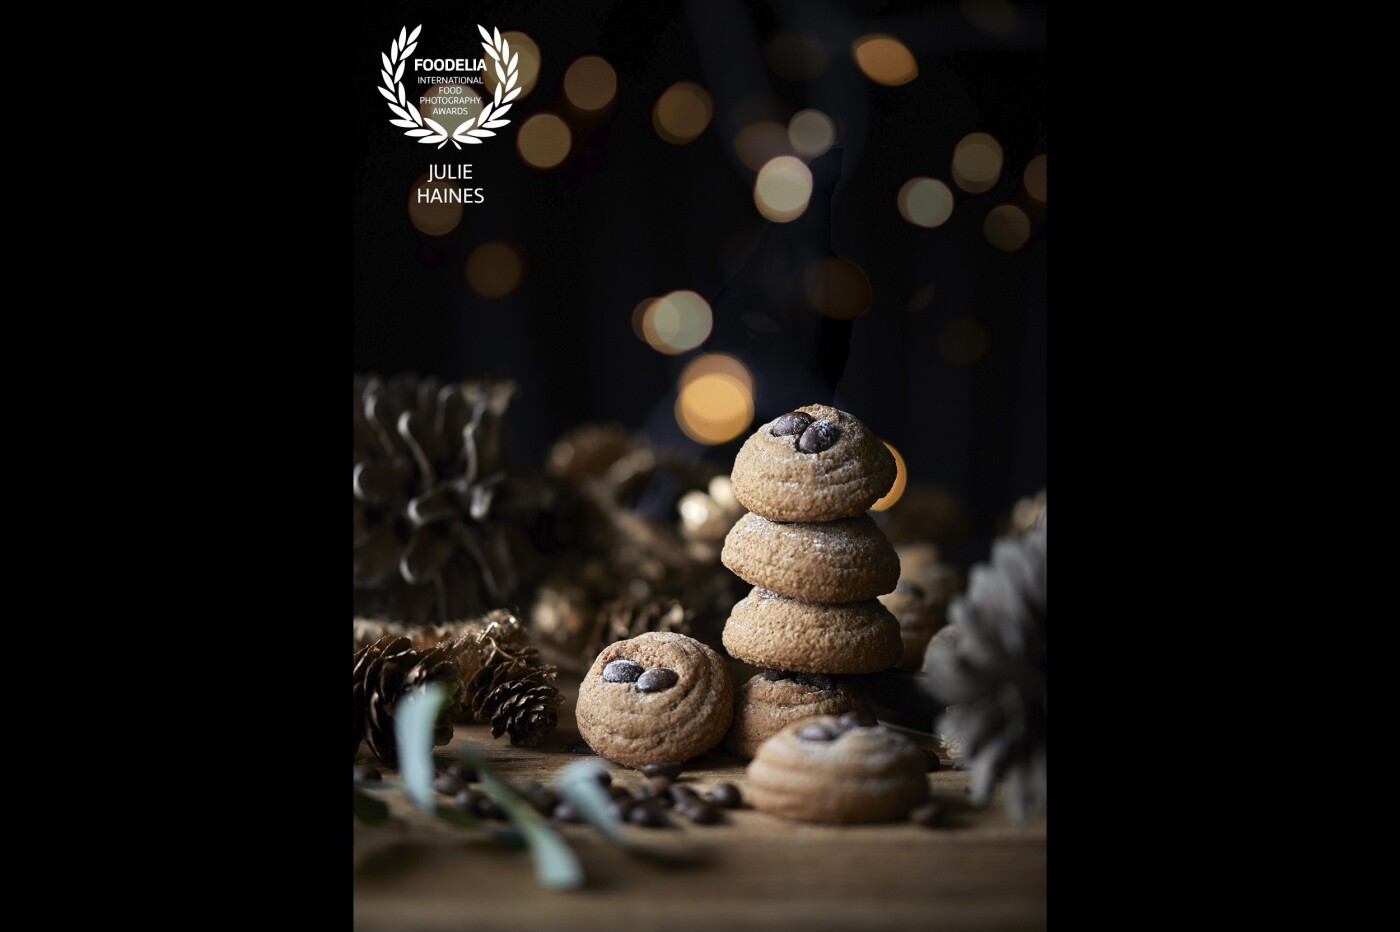 A little bit of holiday magic. These little latte biscuits are delicious with coffee.<br />
Canon 5D MIV  /  ISO 200   /  1/320s  /  f2.8 